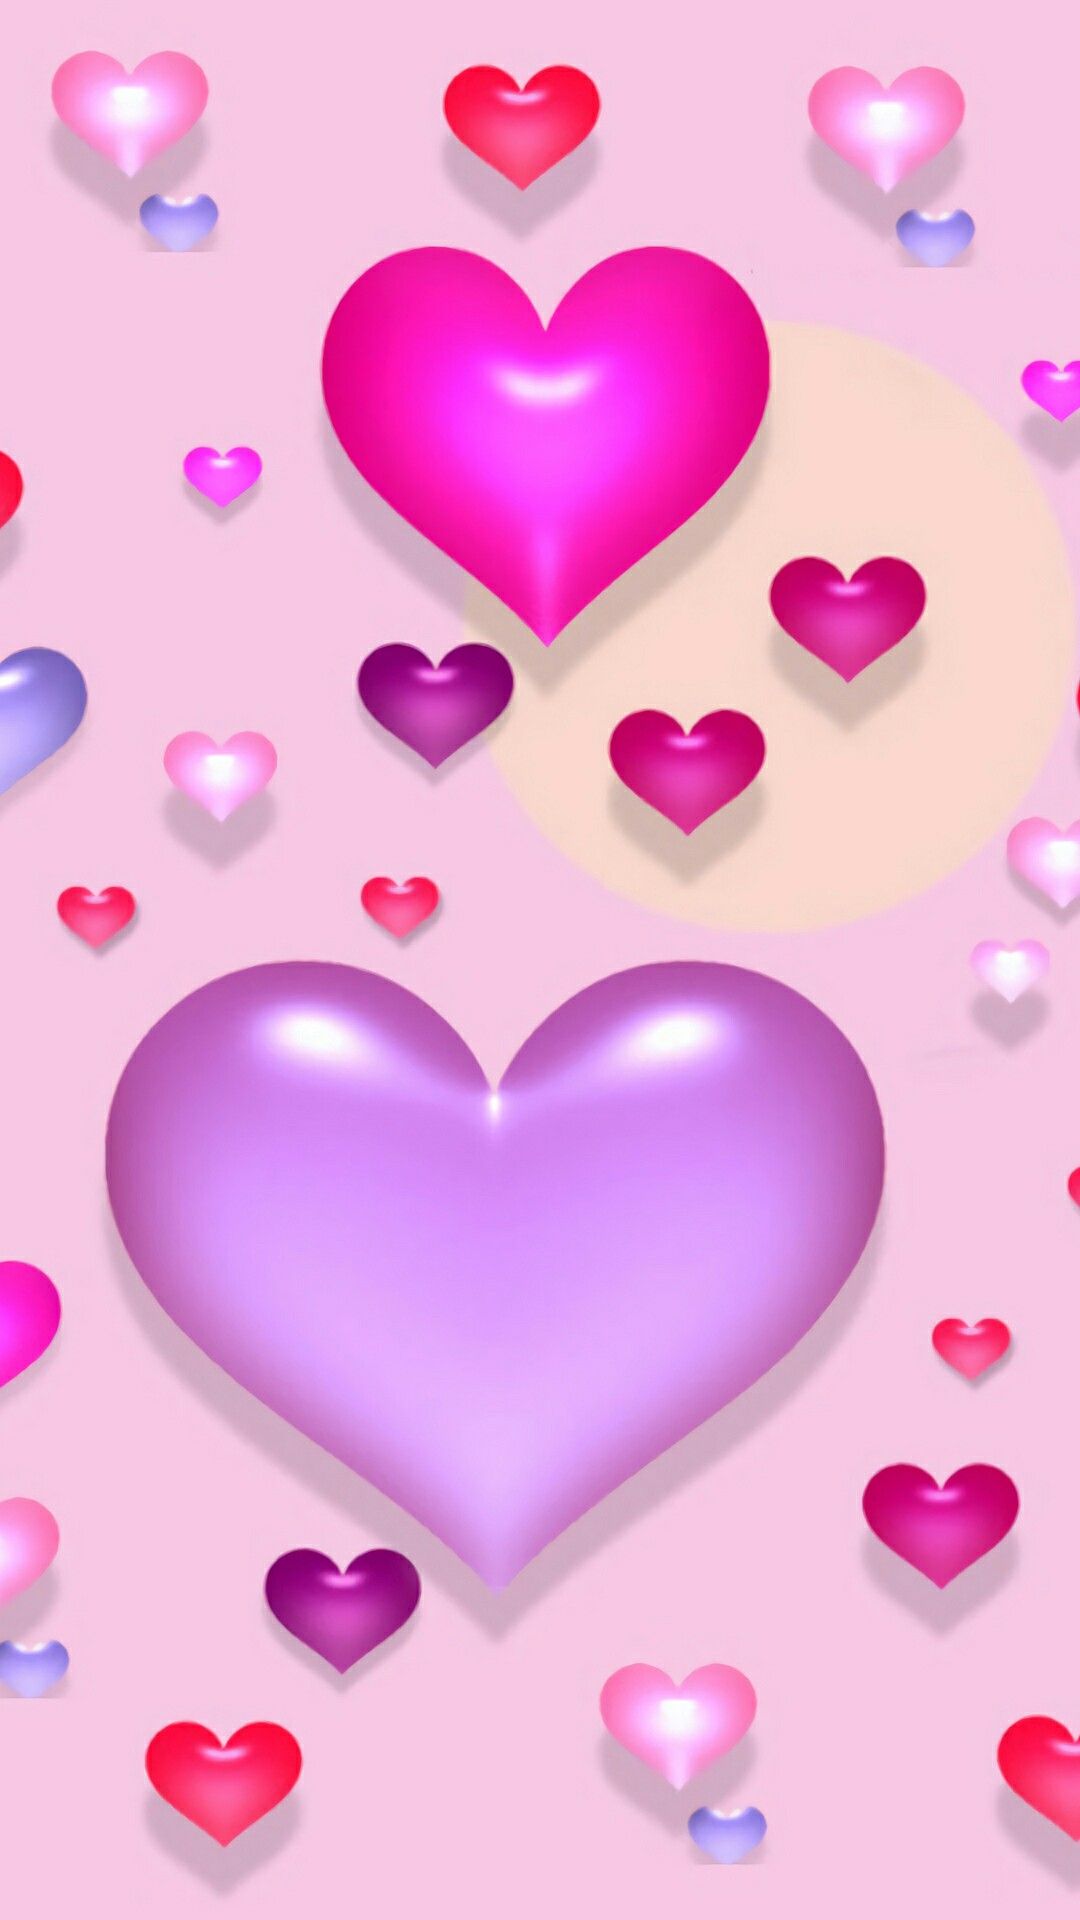 Free download Pink and purple hearts cute girlie wallpaper ...